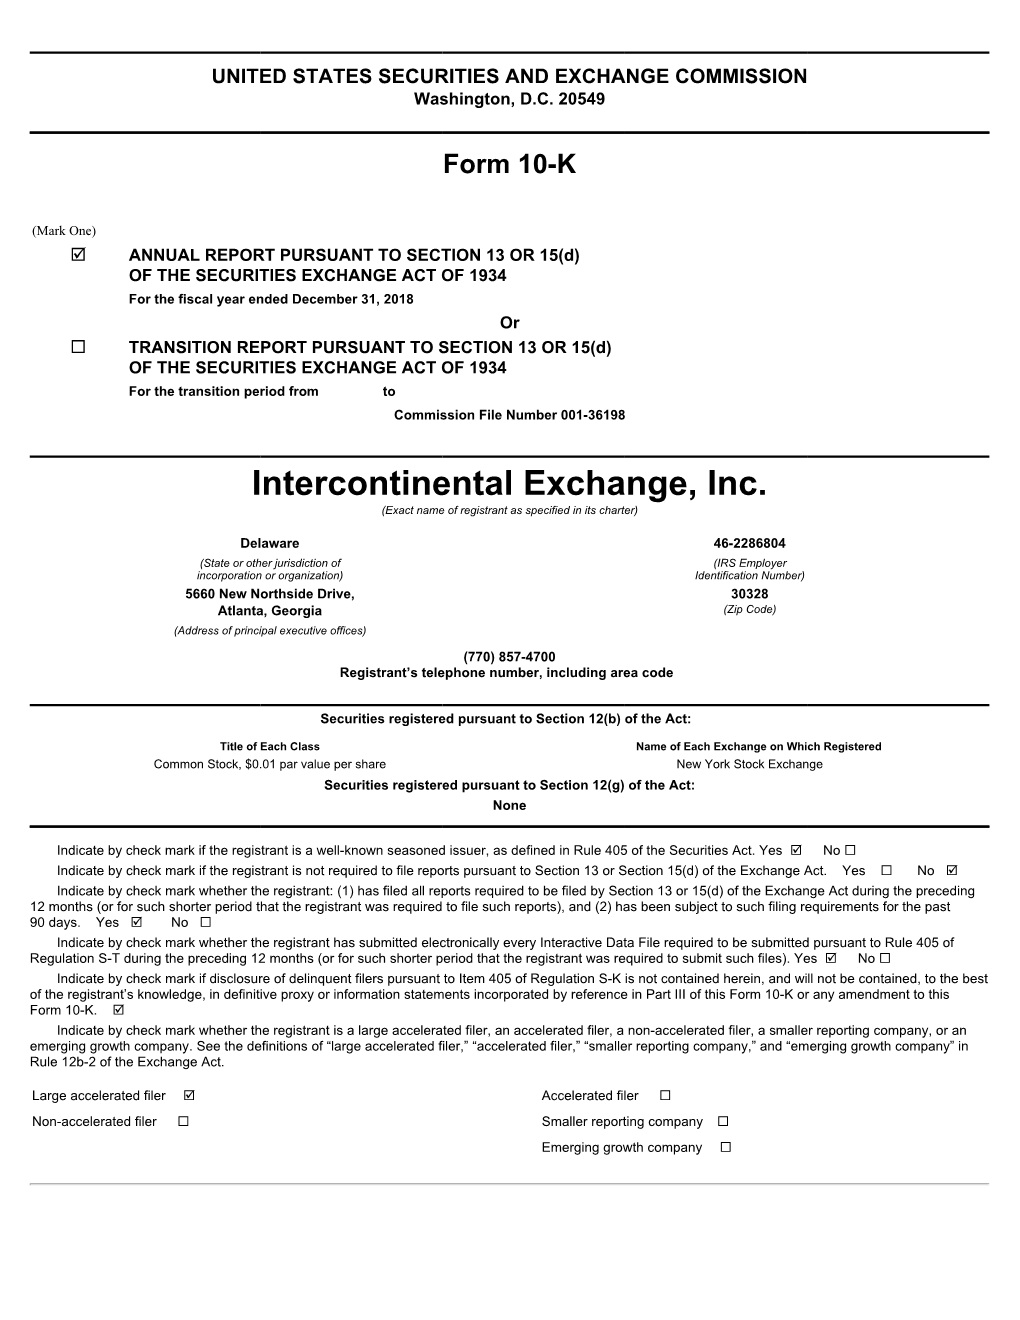 Intercontinental Exchange, Inc. (Exact Name of Registrant As Specified in Its Charter)